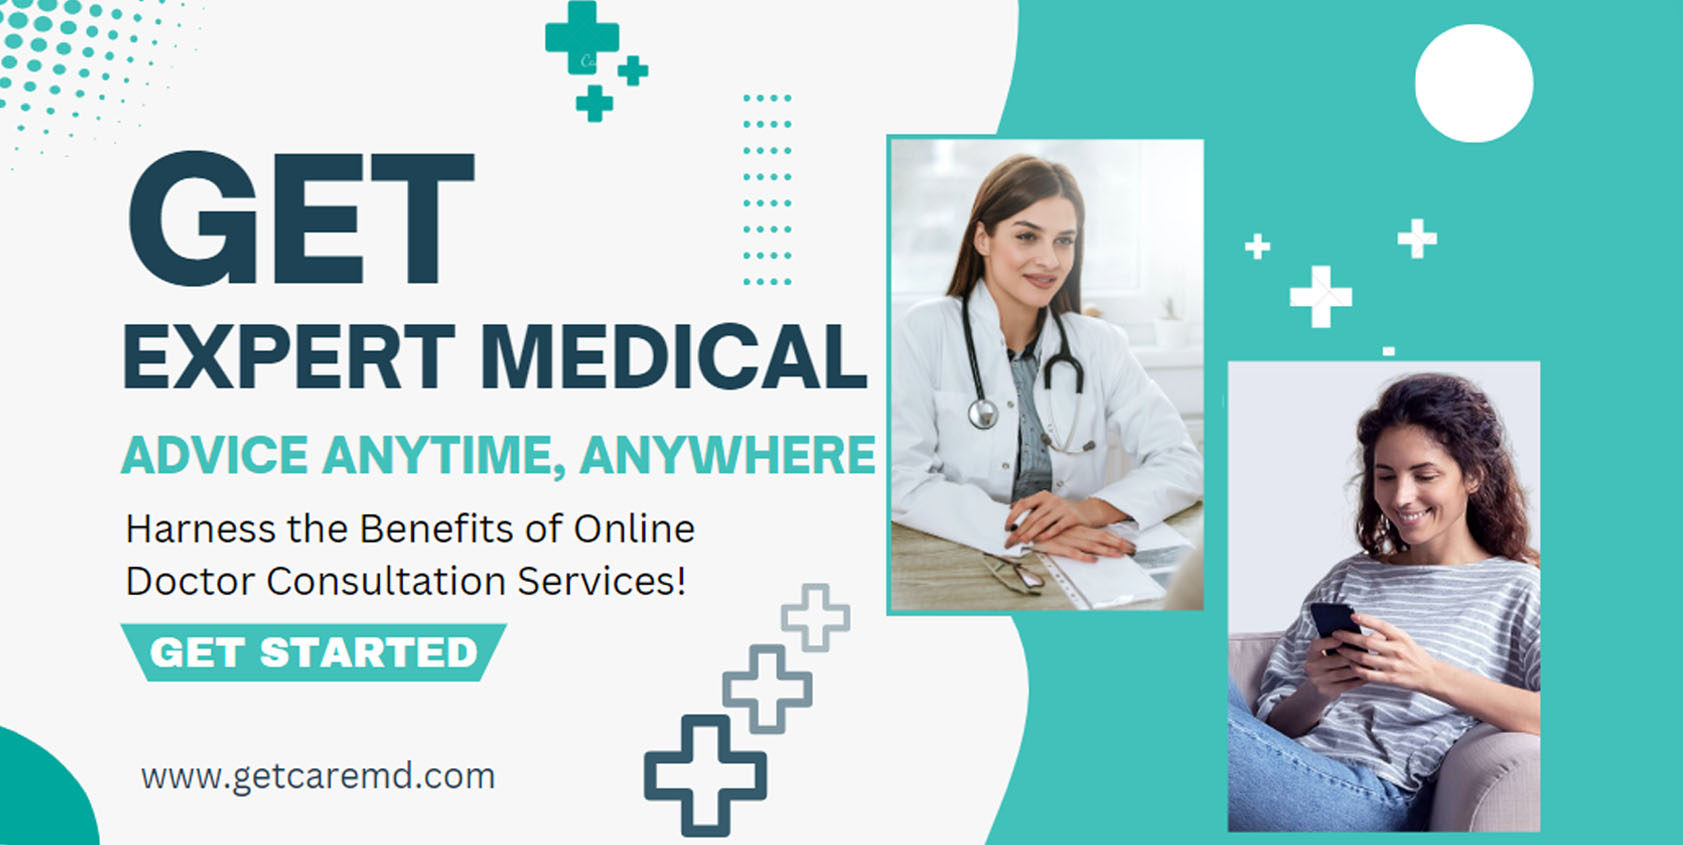 Get Expert Medical Advice Anytime, Anywhere - Harness the Benefits of Online Doctor Consultation Services 